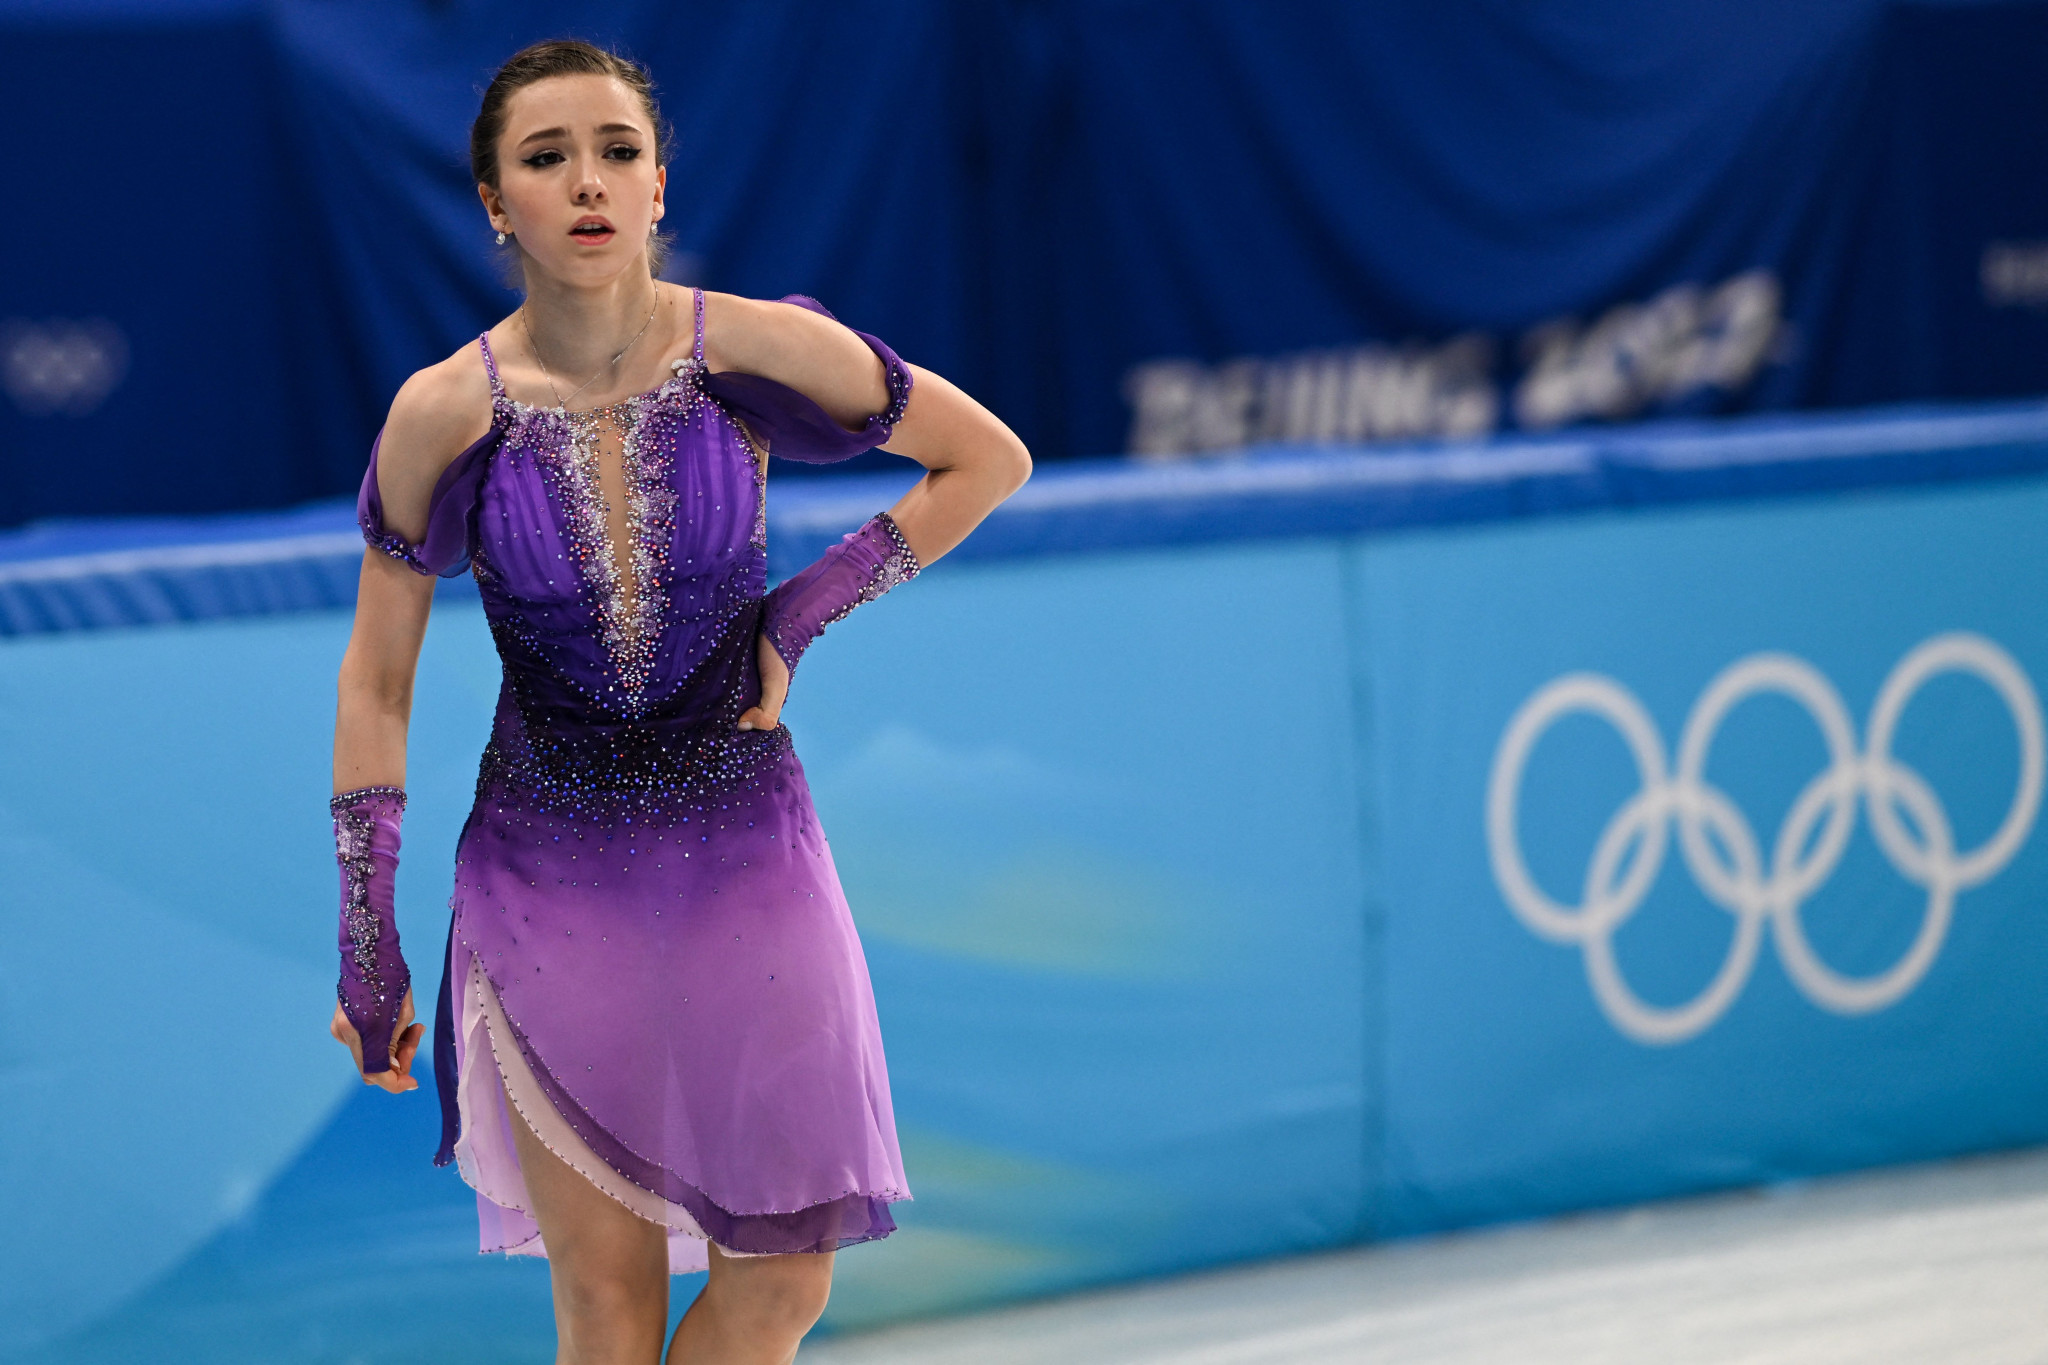 Russia's Kamila Valieva was able to compete yesterday in the women's short programme, despite having recorded a positive doping test before the Winter Olympics ©Getty Images